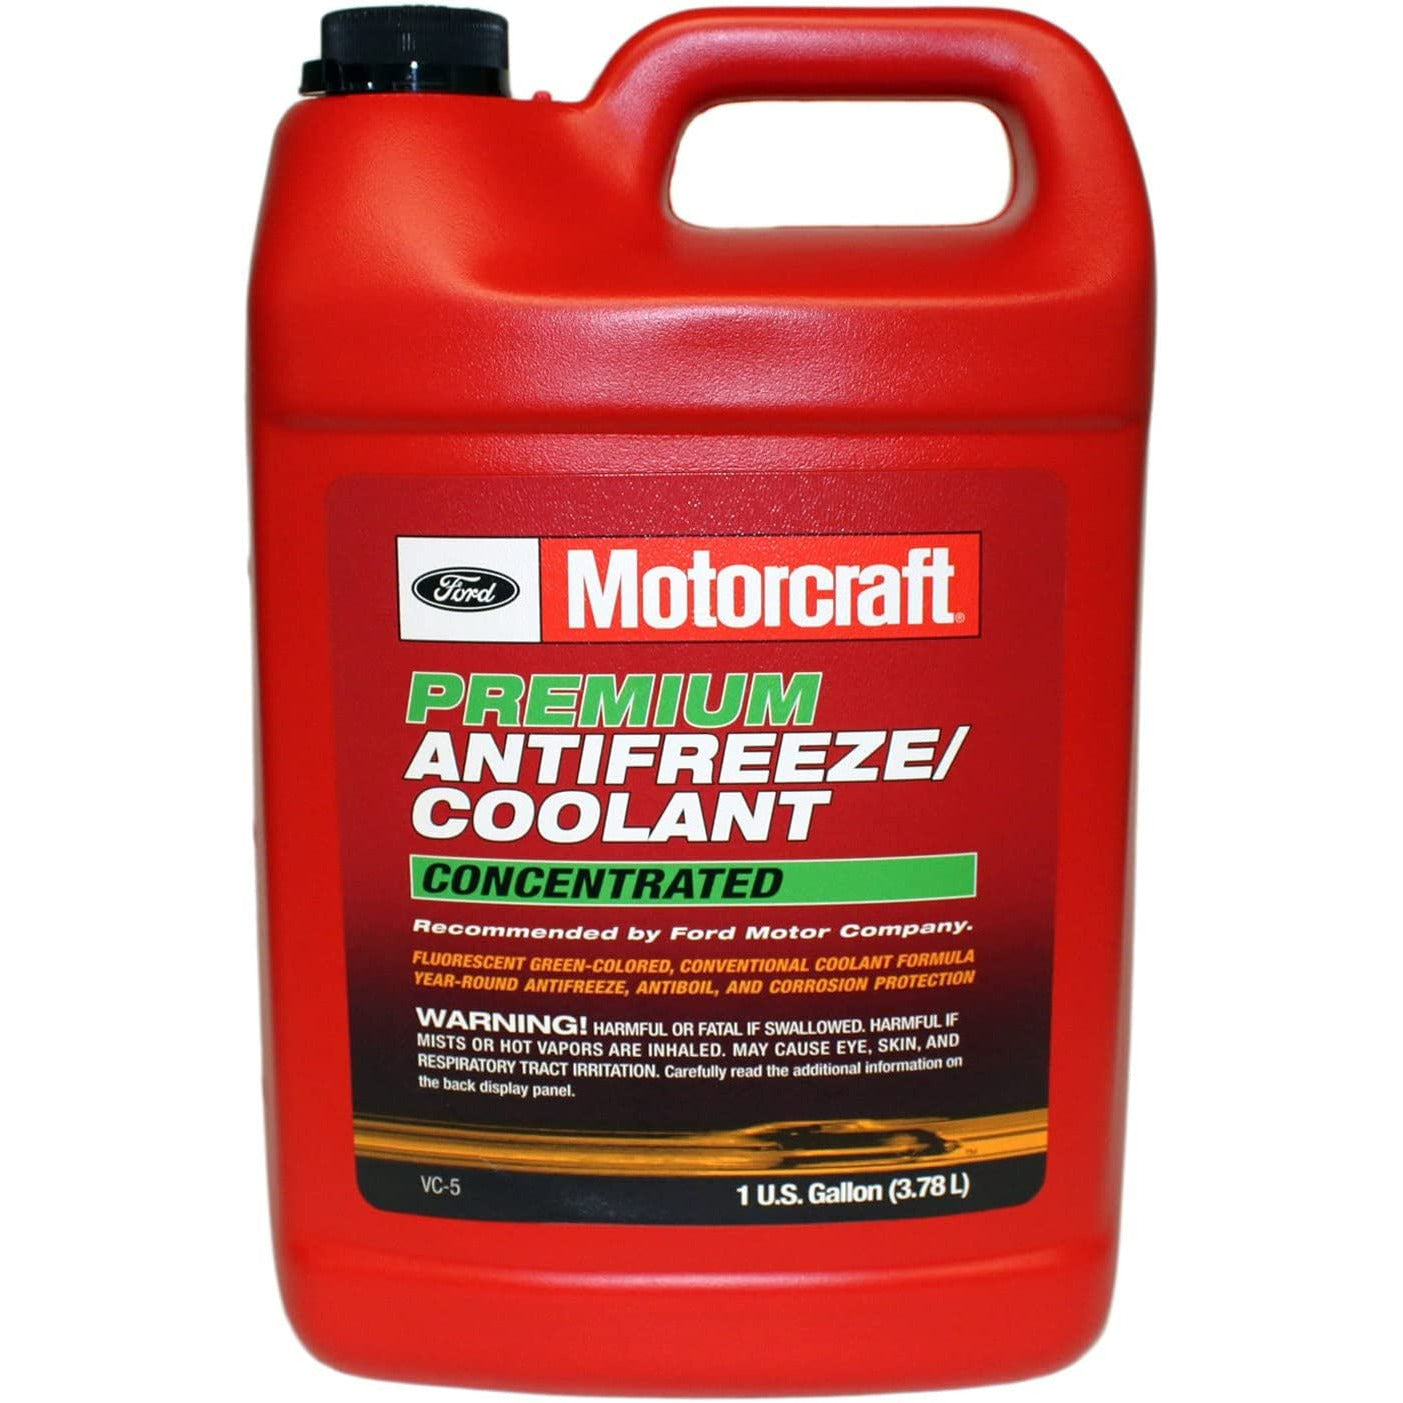 XFM VC5 Motorcraft Conventional Antifreeze/Coolant Concentrated (Green, 1 Gal)